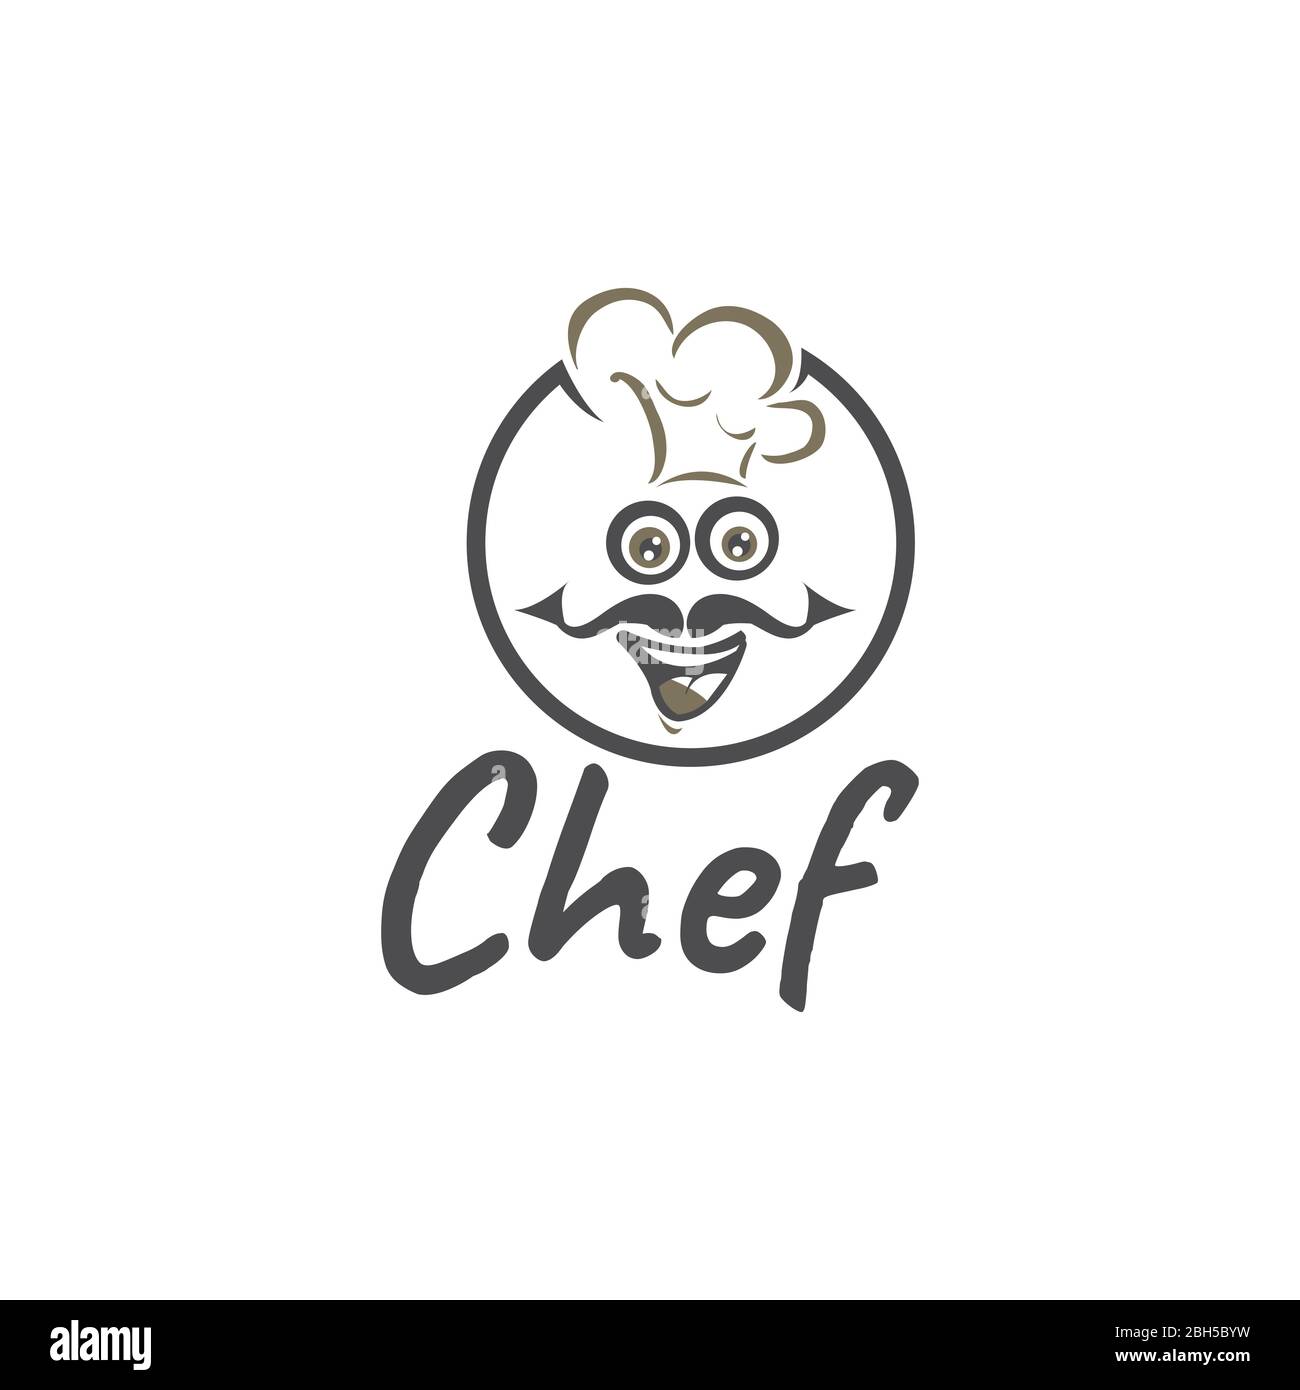 illustration of abstract chef on circle logo design vector modern cartoon style for restaurant / food and drink / card Stock Vector